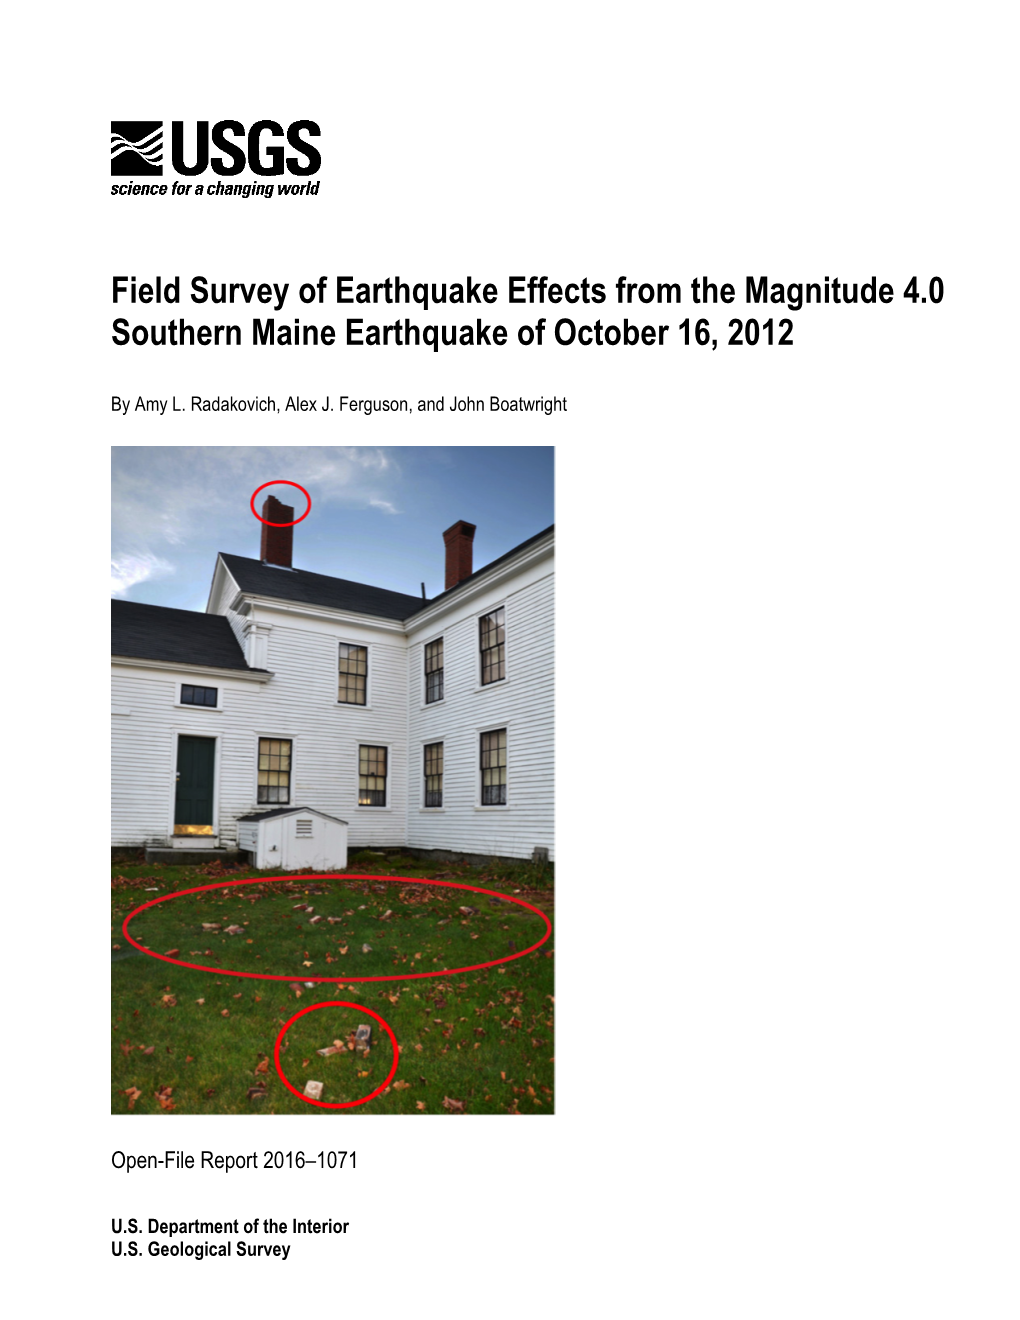 Field Survey of Earthquake Effects from the Magnitude 4.0 Southern Maine Earthquake of October 16, 2012